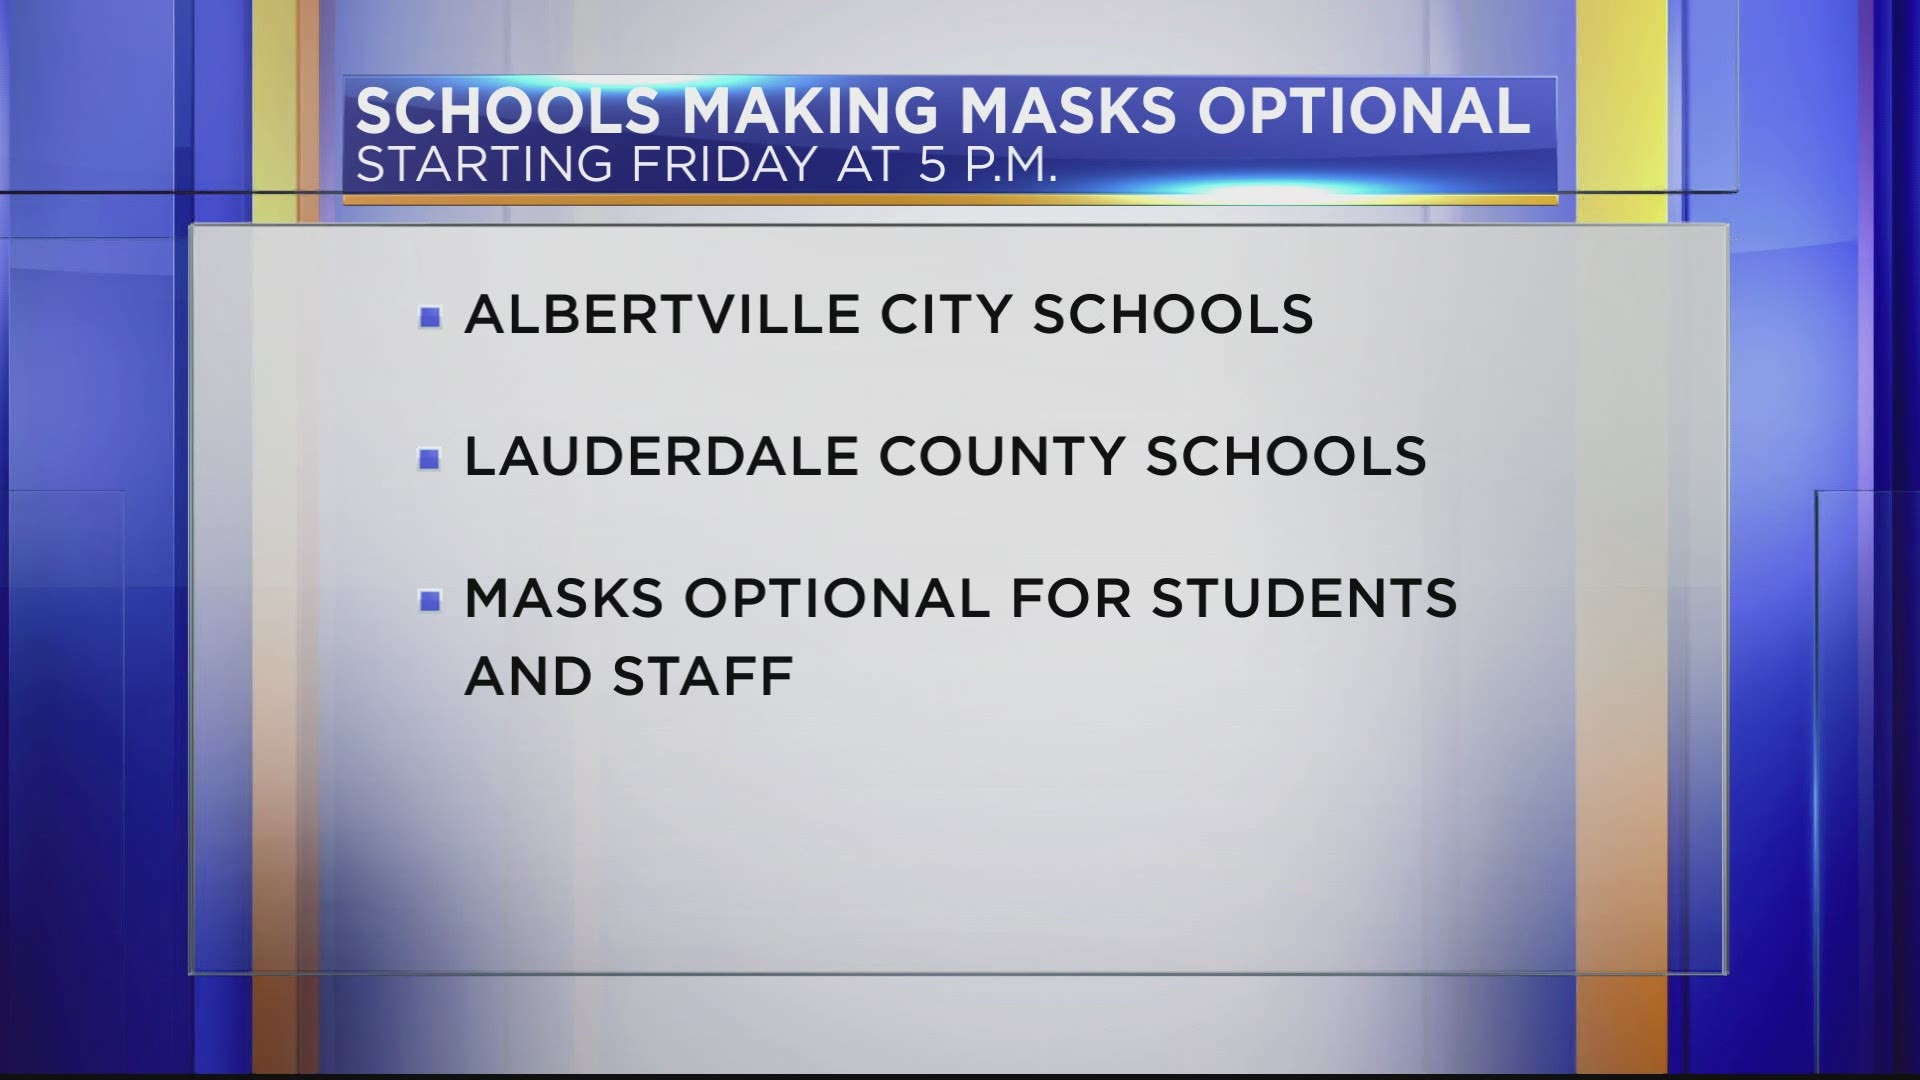 As Gov. Ivey's statewide mask mandate expires on April 9, school districts must decide whether to still require masks.